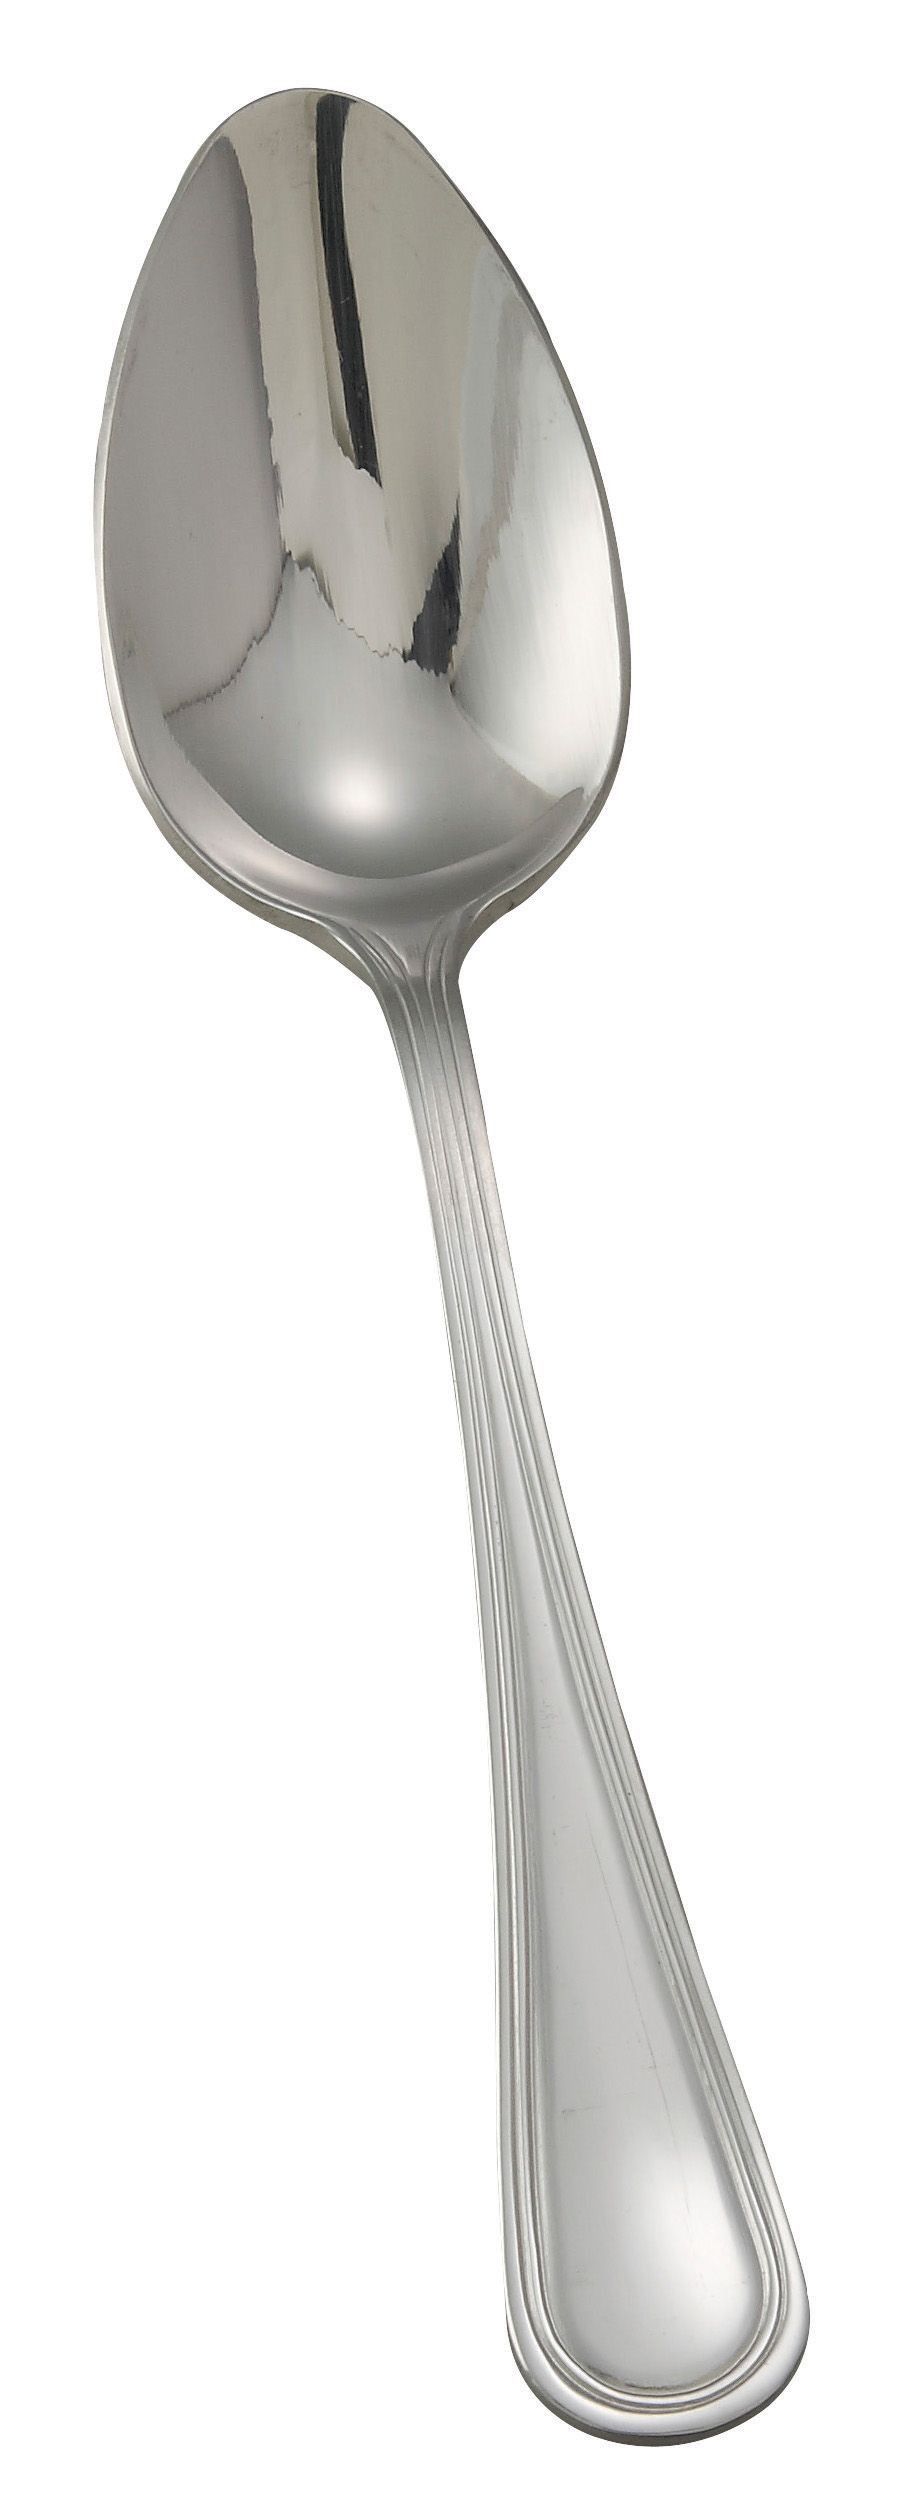 Winco 0030-10 Shangarila Extra Heavy Stainless Steel European Table Spoon (12/Pack)